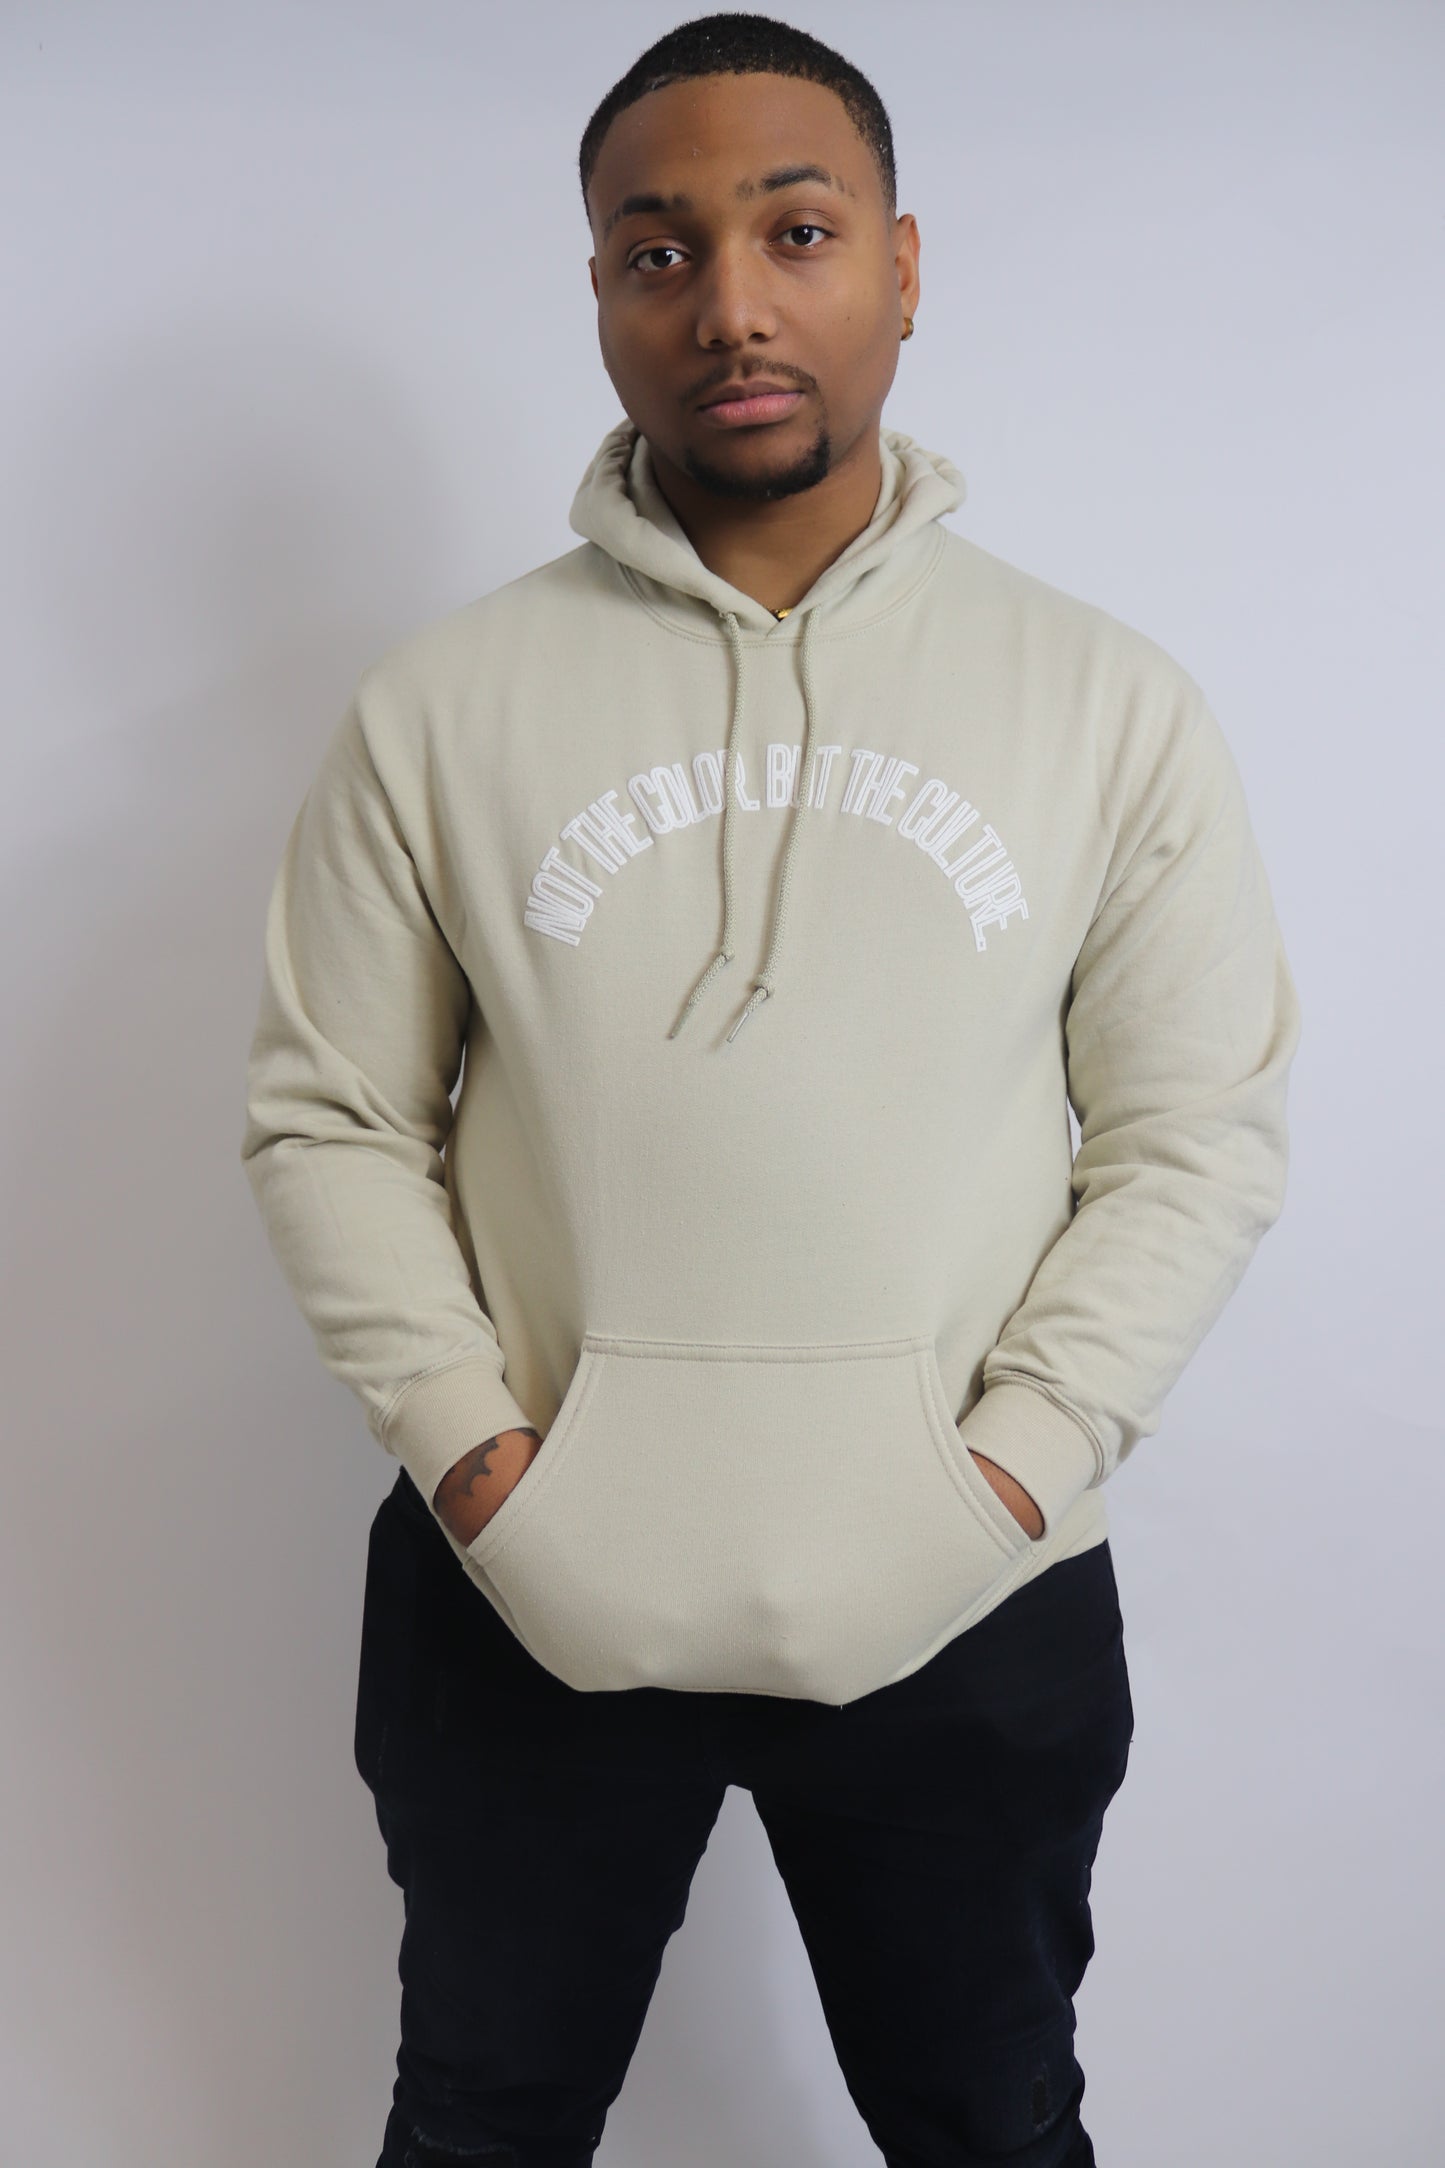 Not The Color. But The Culture. - Motto Unisex Hoodie